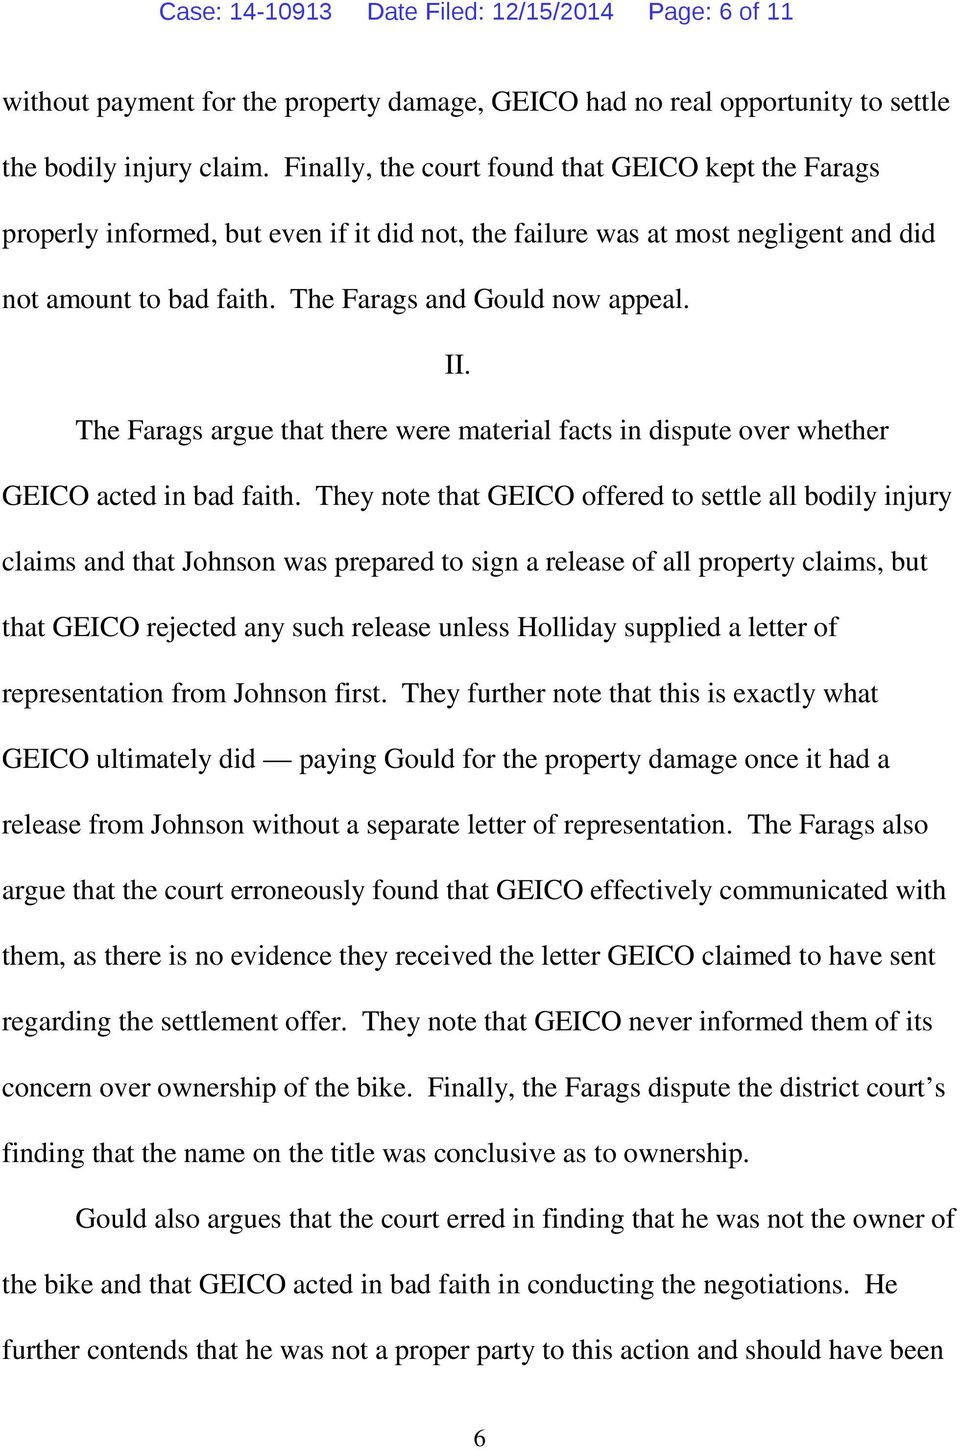 The Farags argue that there were material facts in dispute over whether GEICO acted in bad faith.